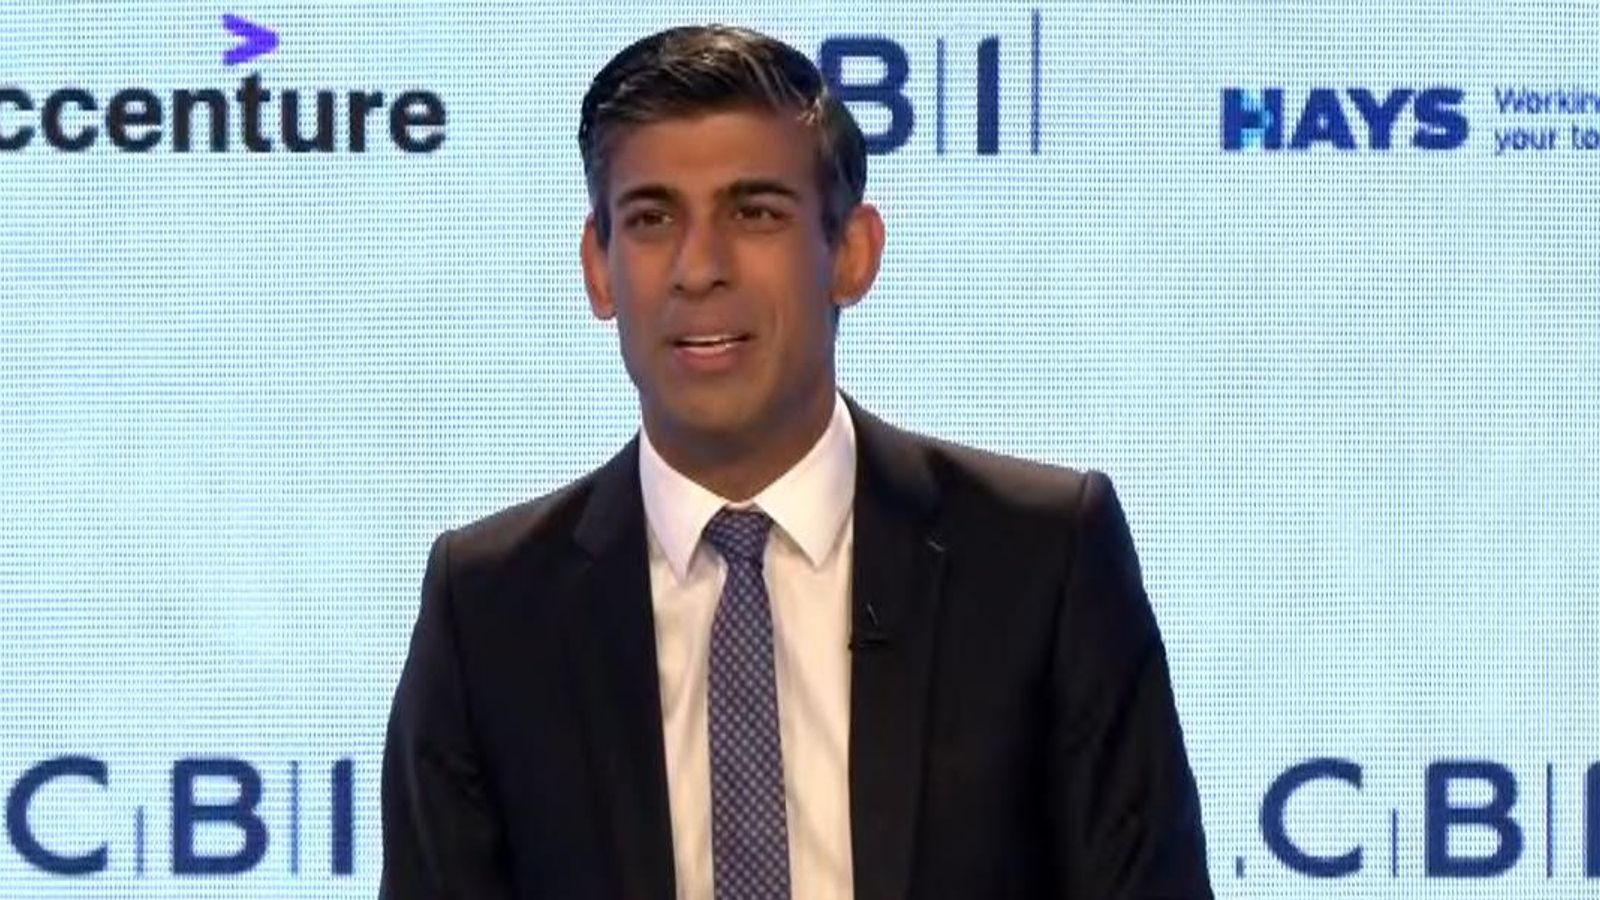 Rishi Sunak tries to quash rumours of closer alignment with EU, saying 'I believe in Brexit'